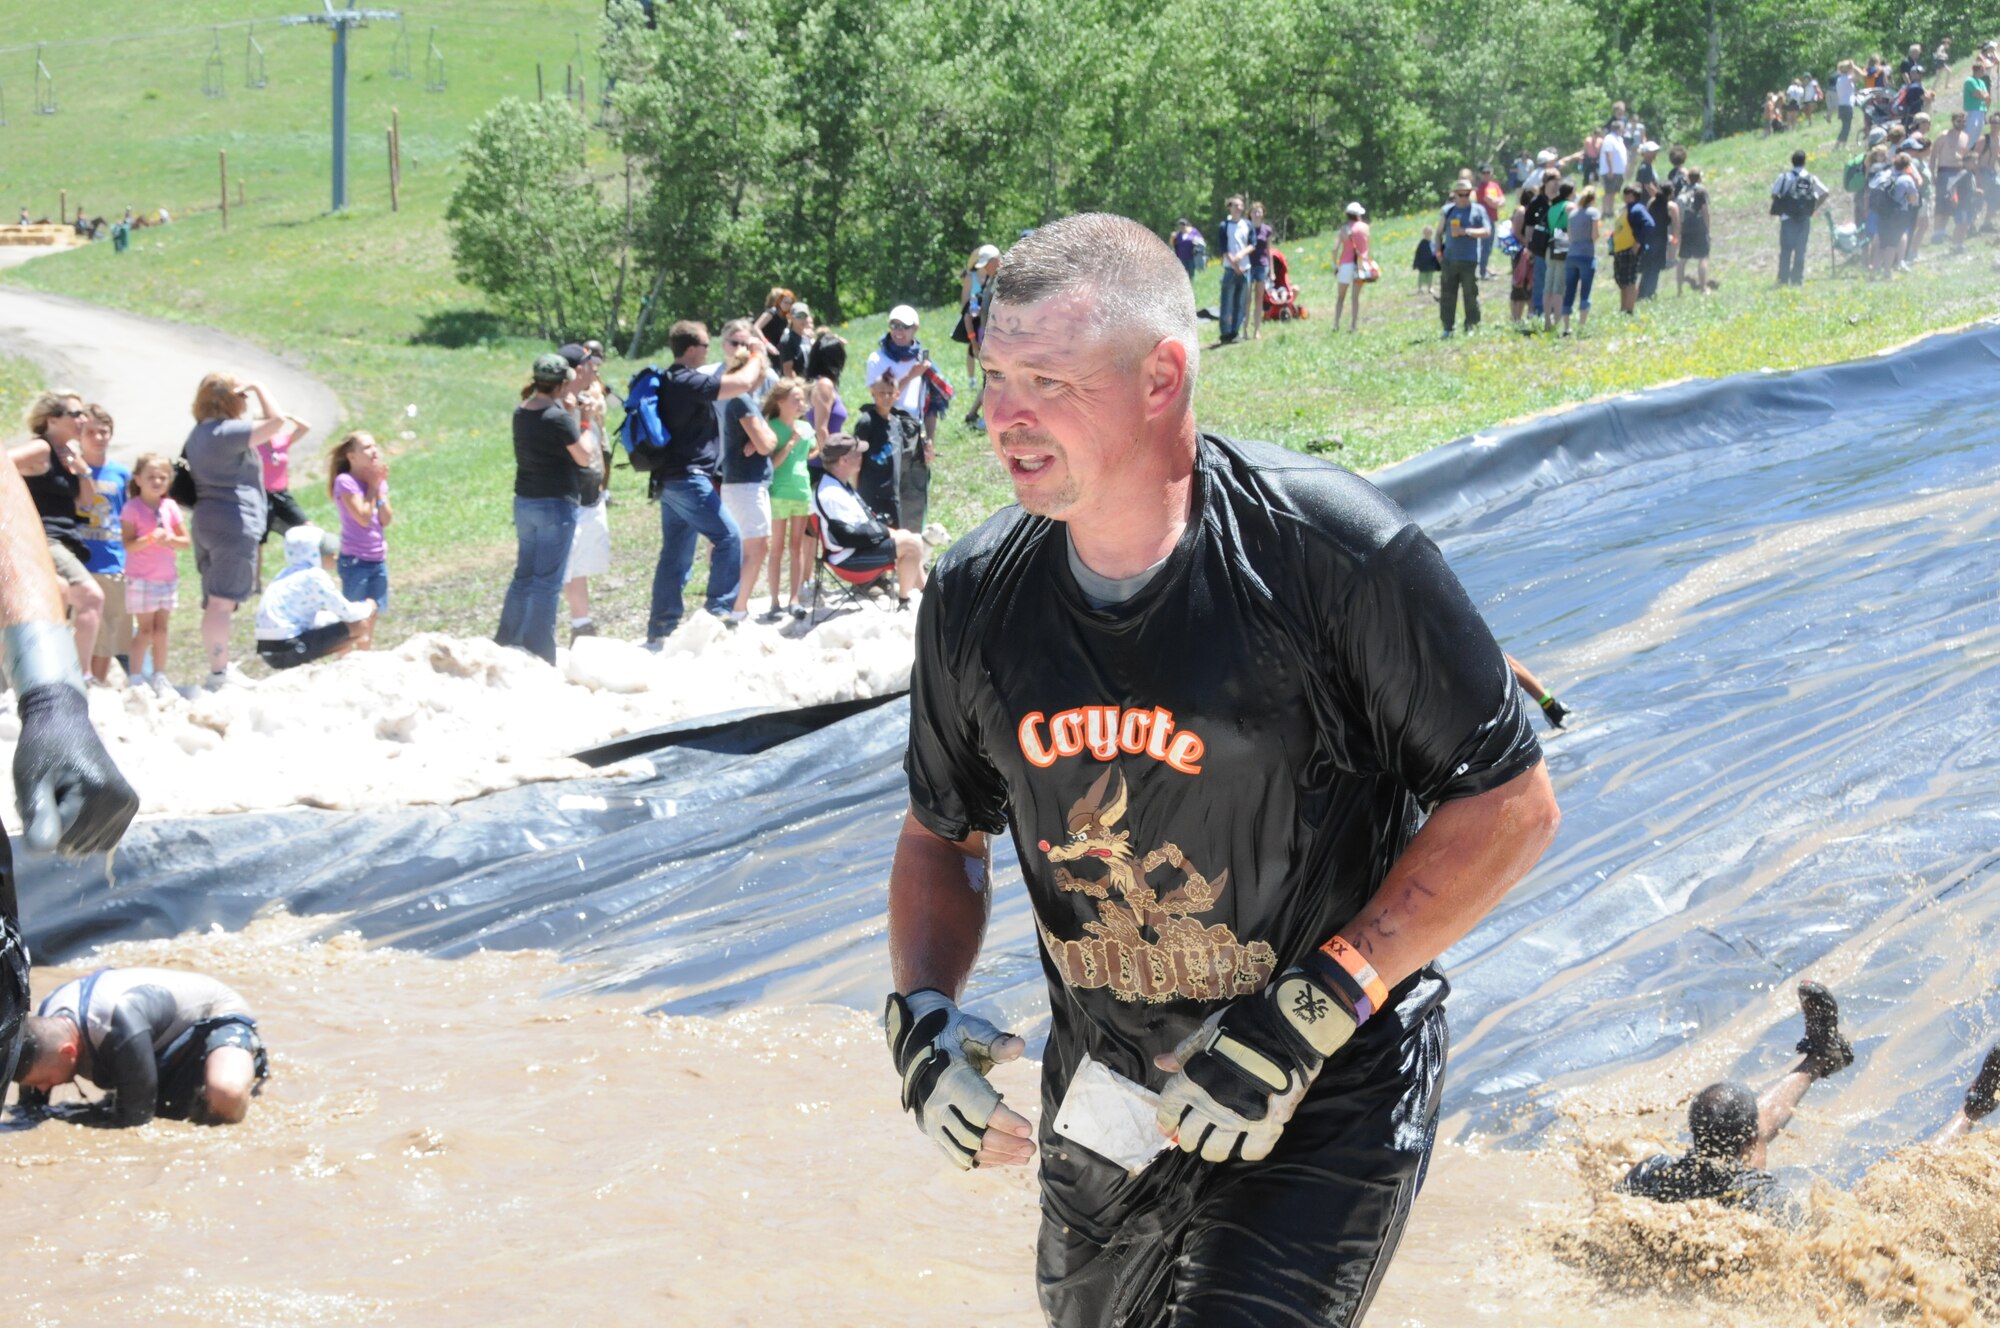 Senior Master Sgt. Brian Willard catches his breath after completing the final obstacle. (photos by Master Sgt. Allen Pickert)